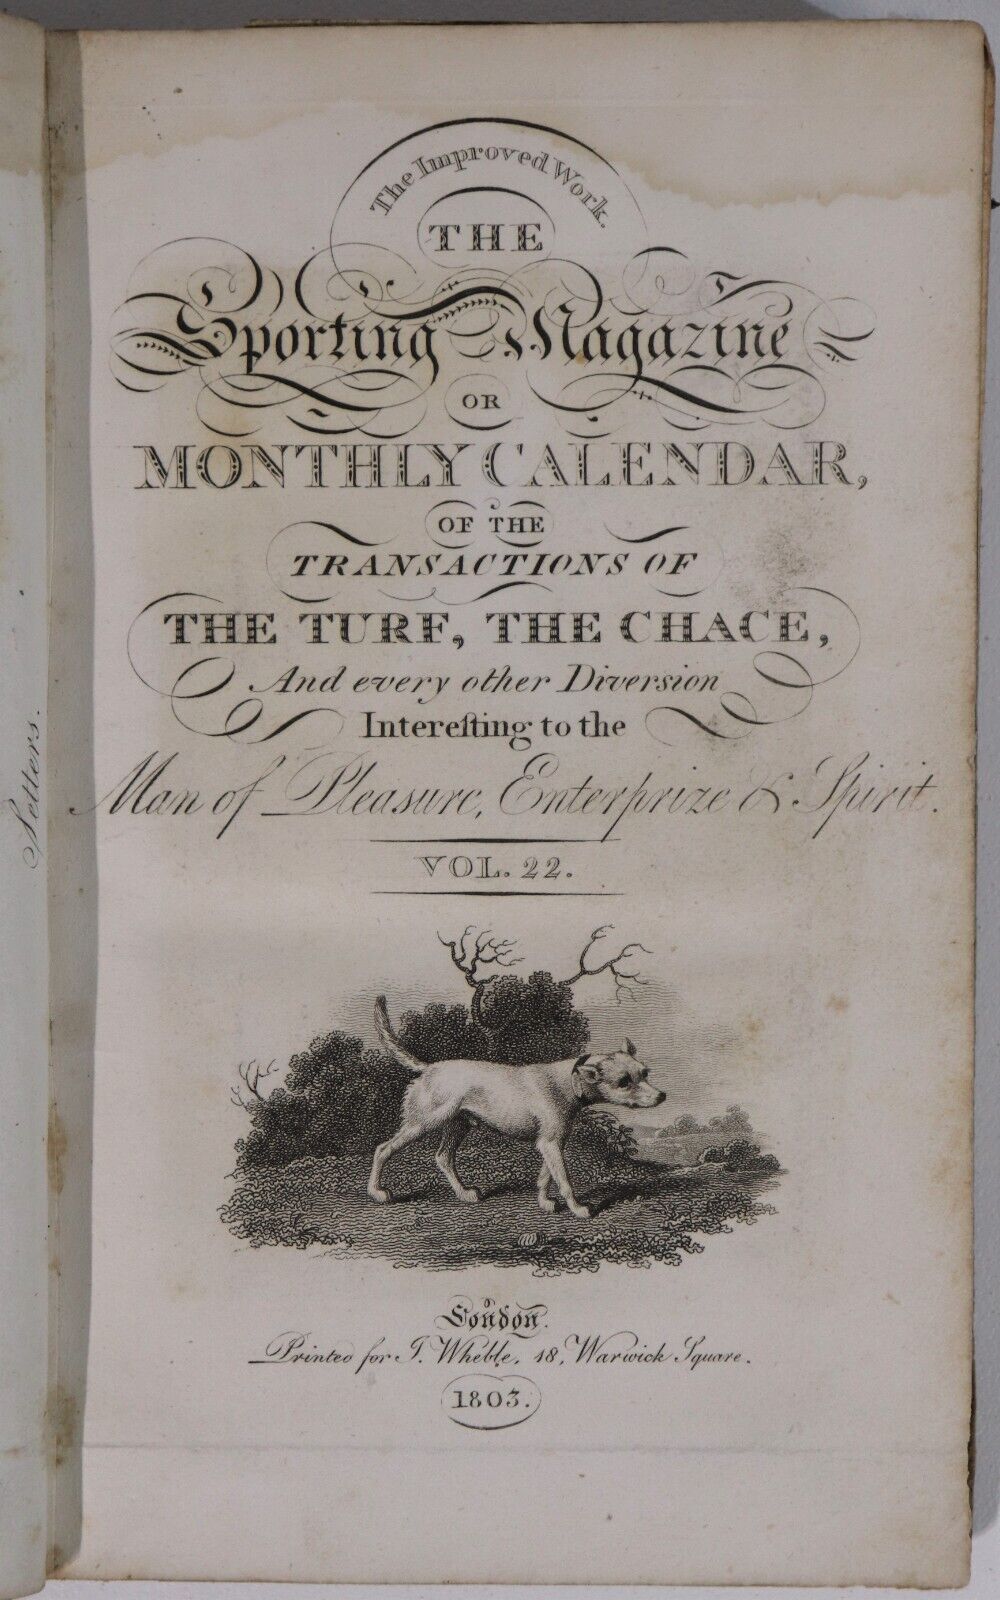 The Sporting Magazine: Monthly Calendar - 1803 - Antiquarian Sport History Book